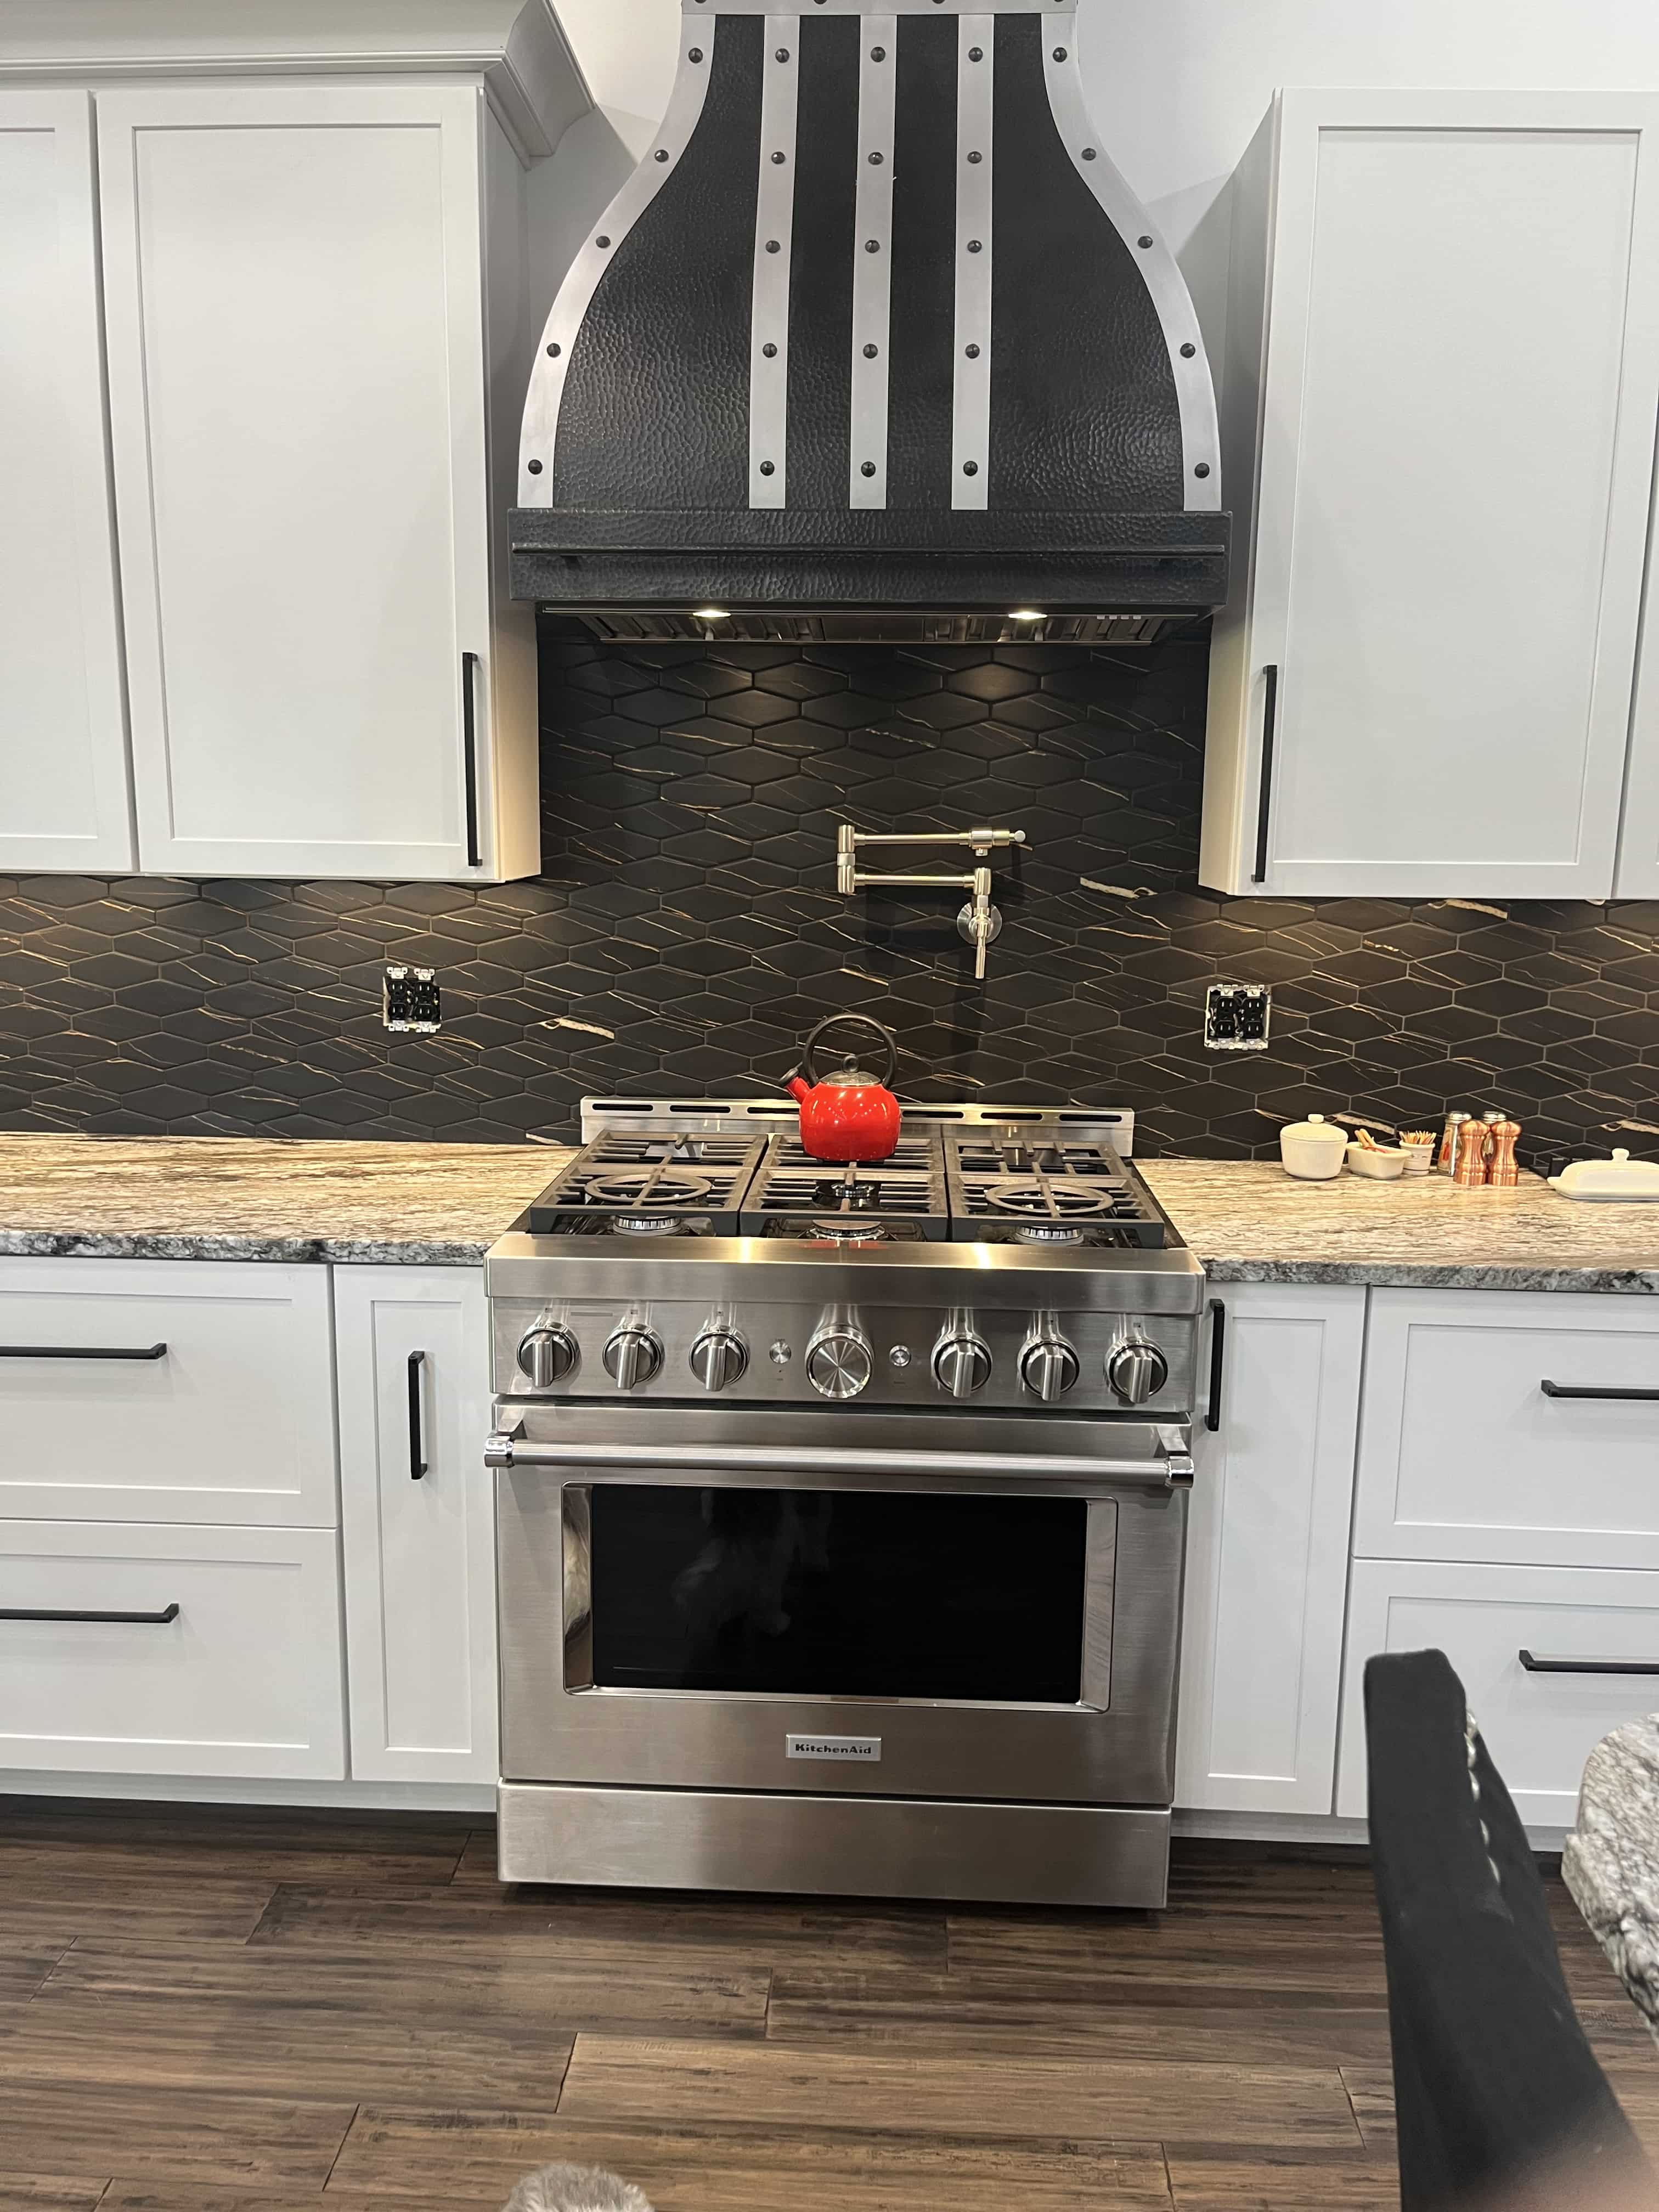 CopperSmith Artisan AT1 Blackened Brass Kitchen Range Hood in a traditional kitchen with white cabinets marble countertops and black backsplash